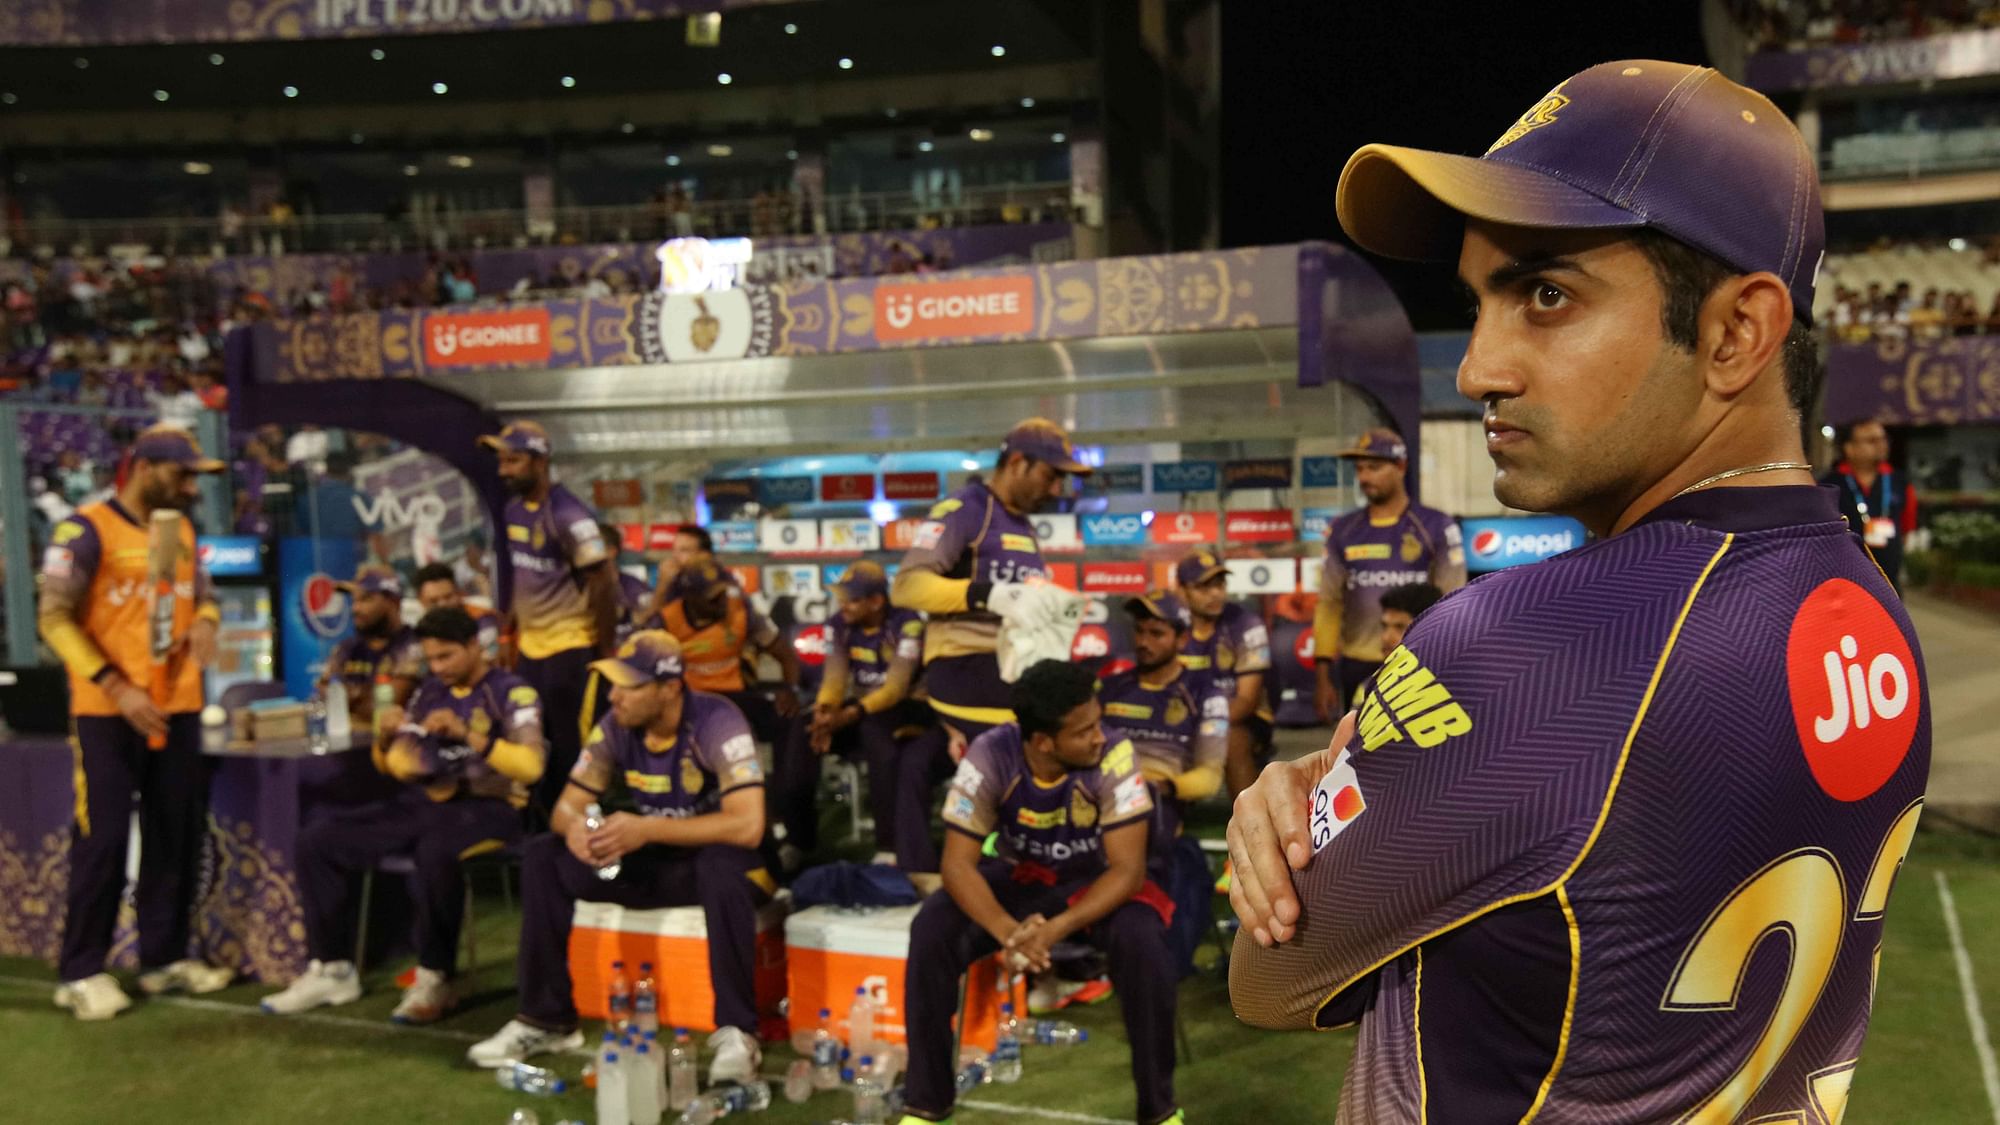 KKR remains the most valuable IPL brand. (Photo: BCCI)